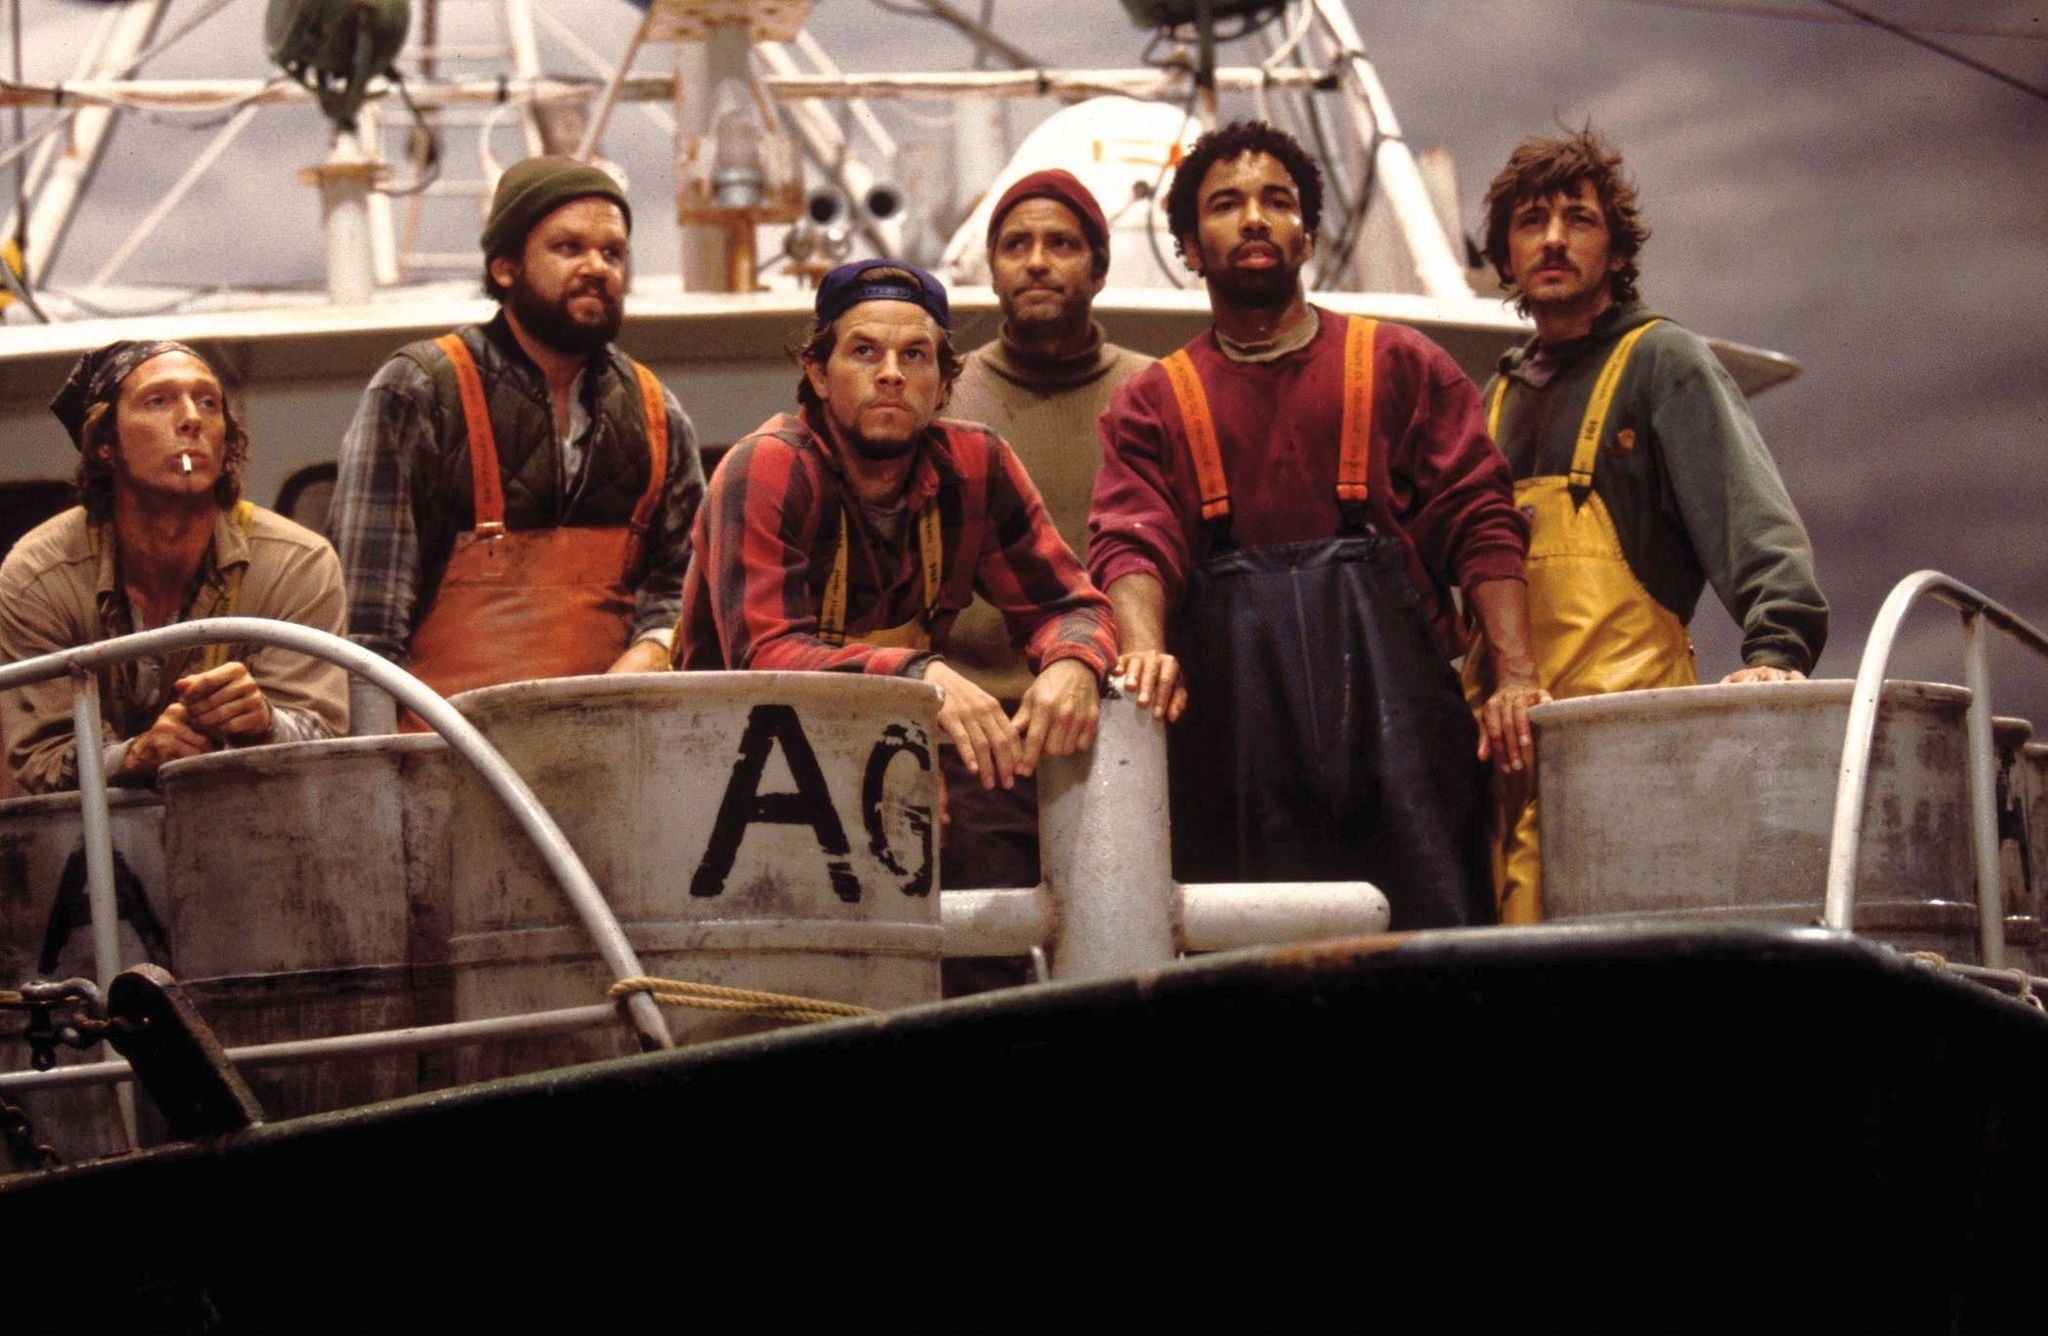 Six actors portraying fishermen in rugged gear on a boat, looking intently beyond the camera